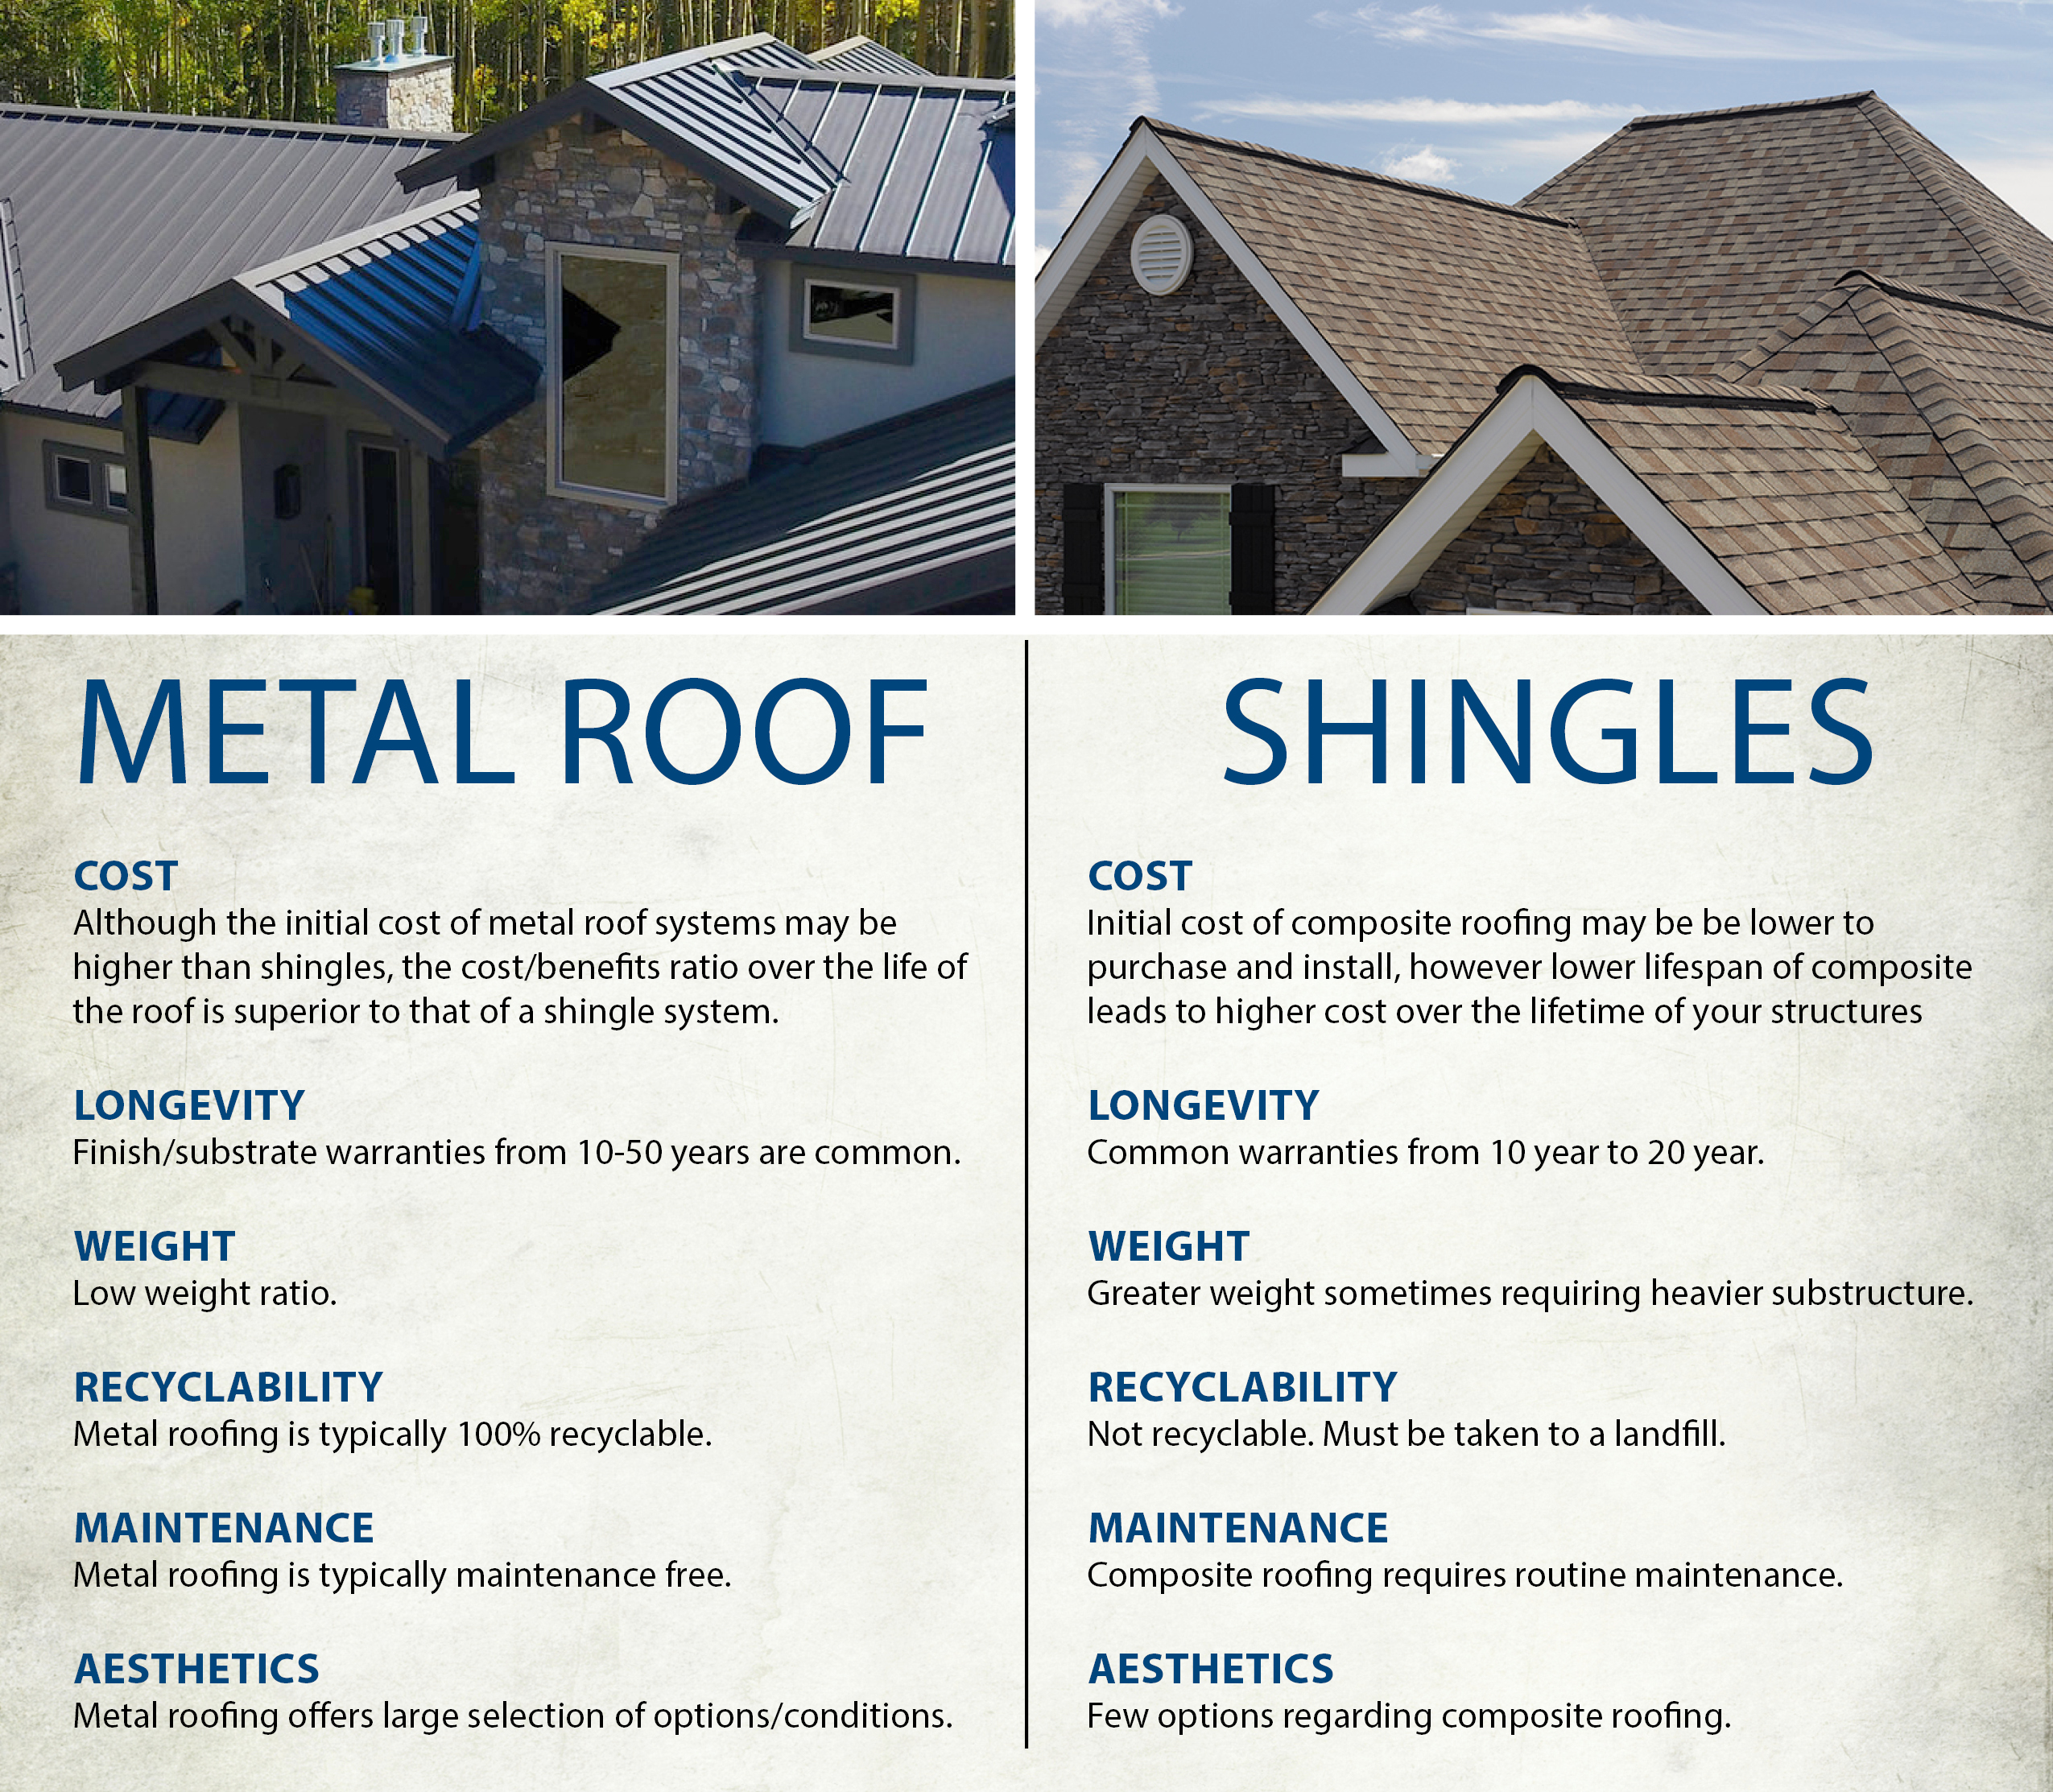 What are the Benefits of Using Metal Roofing 38987 1 - What are the Benefits of Using Metal Roofing?